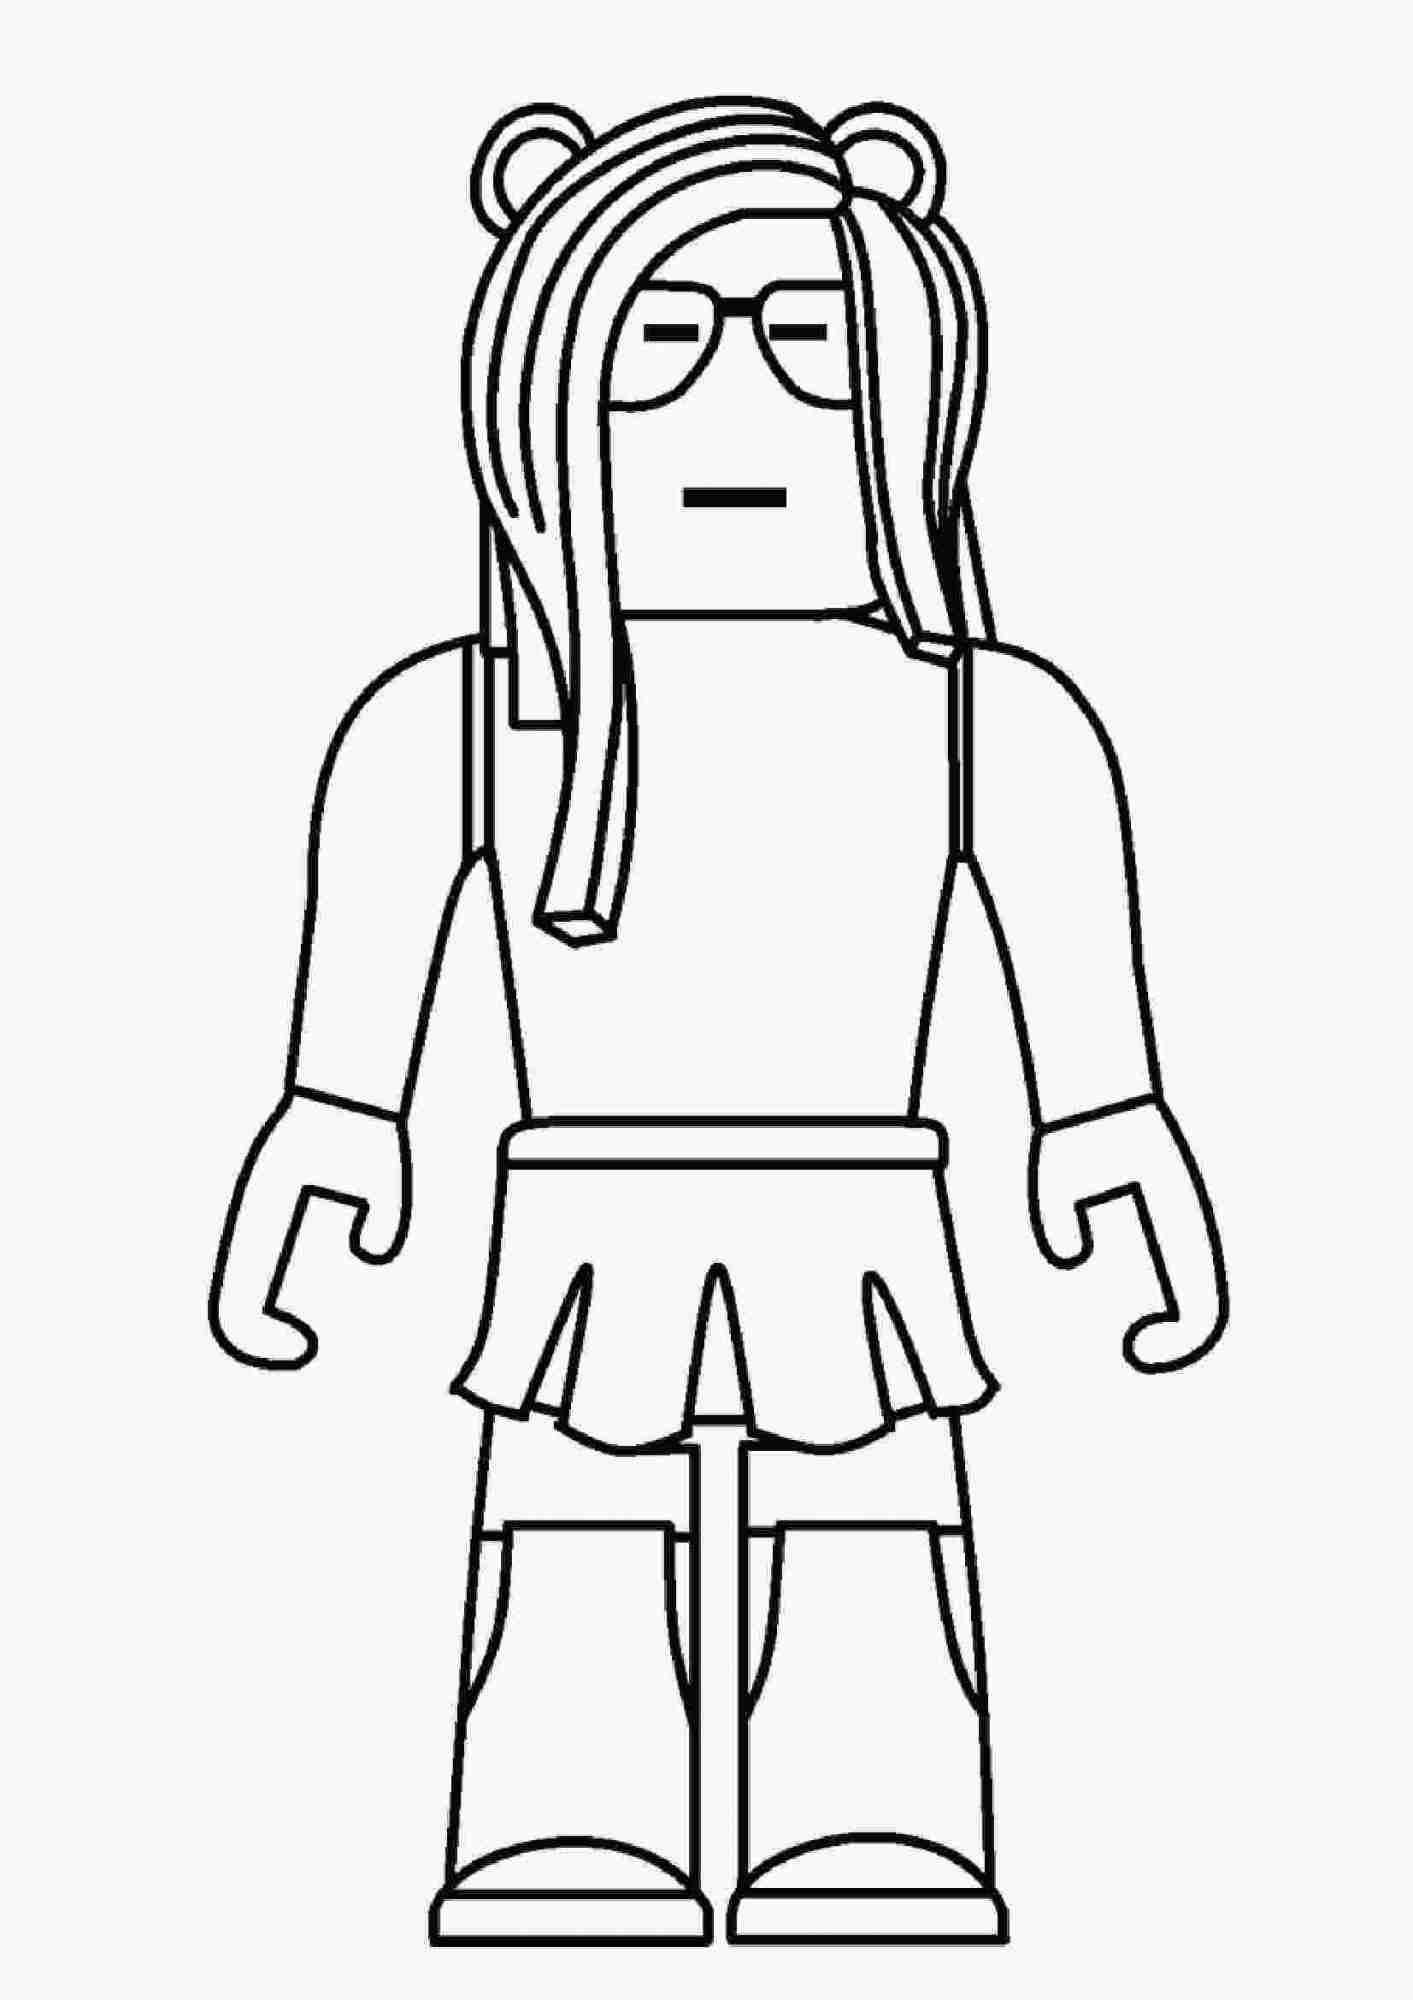 Sleepy girl wears skirt in Roblox game Coloring Pages   Lego ...